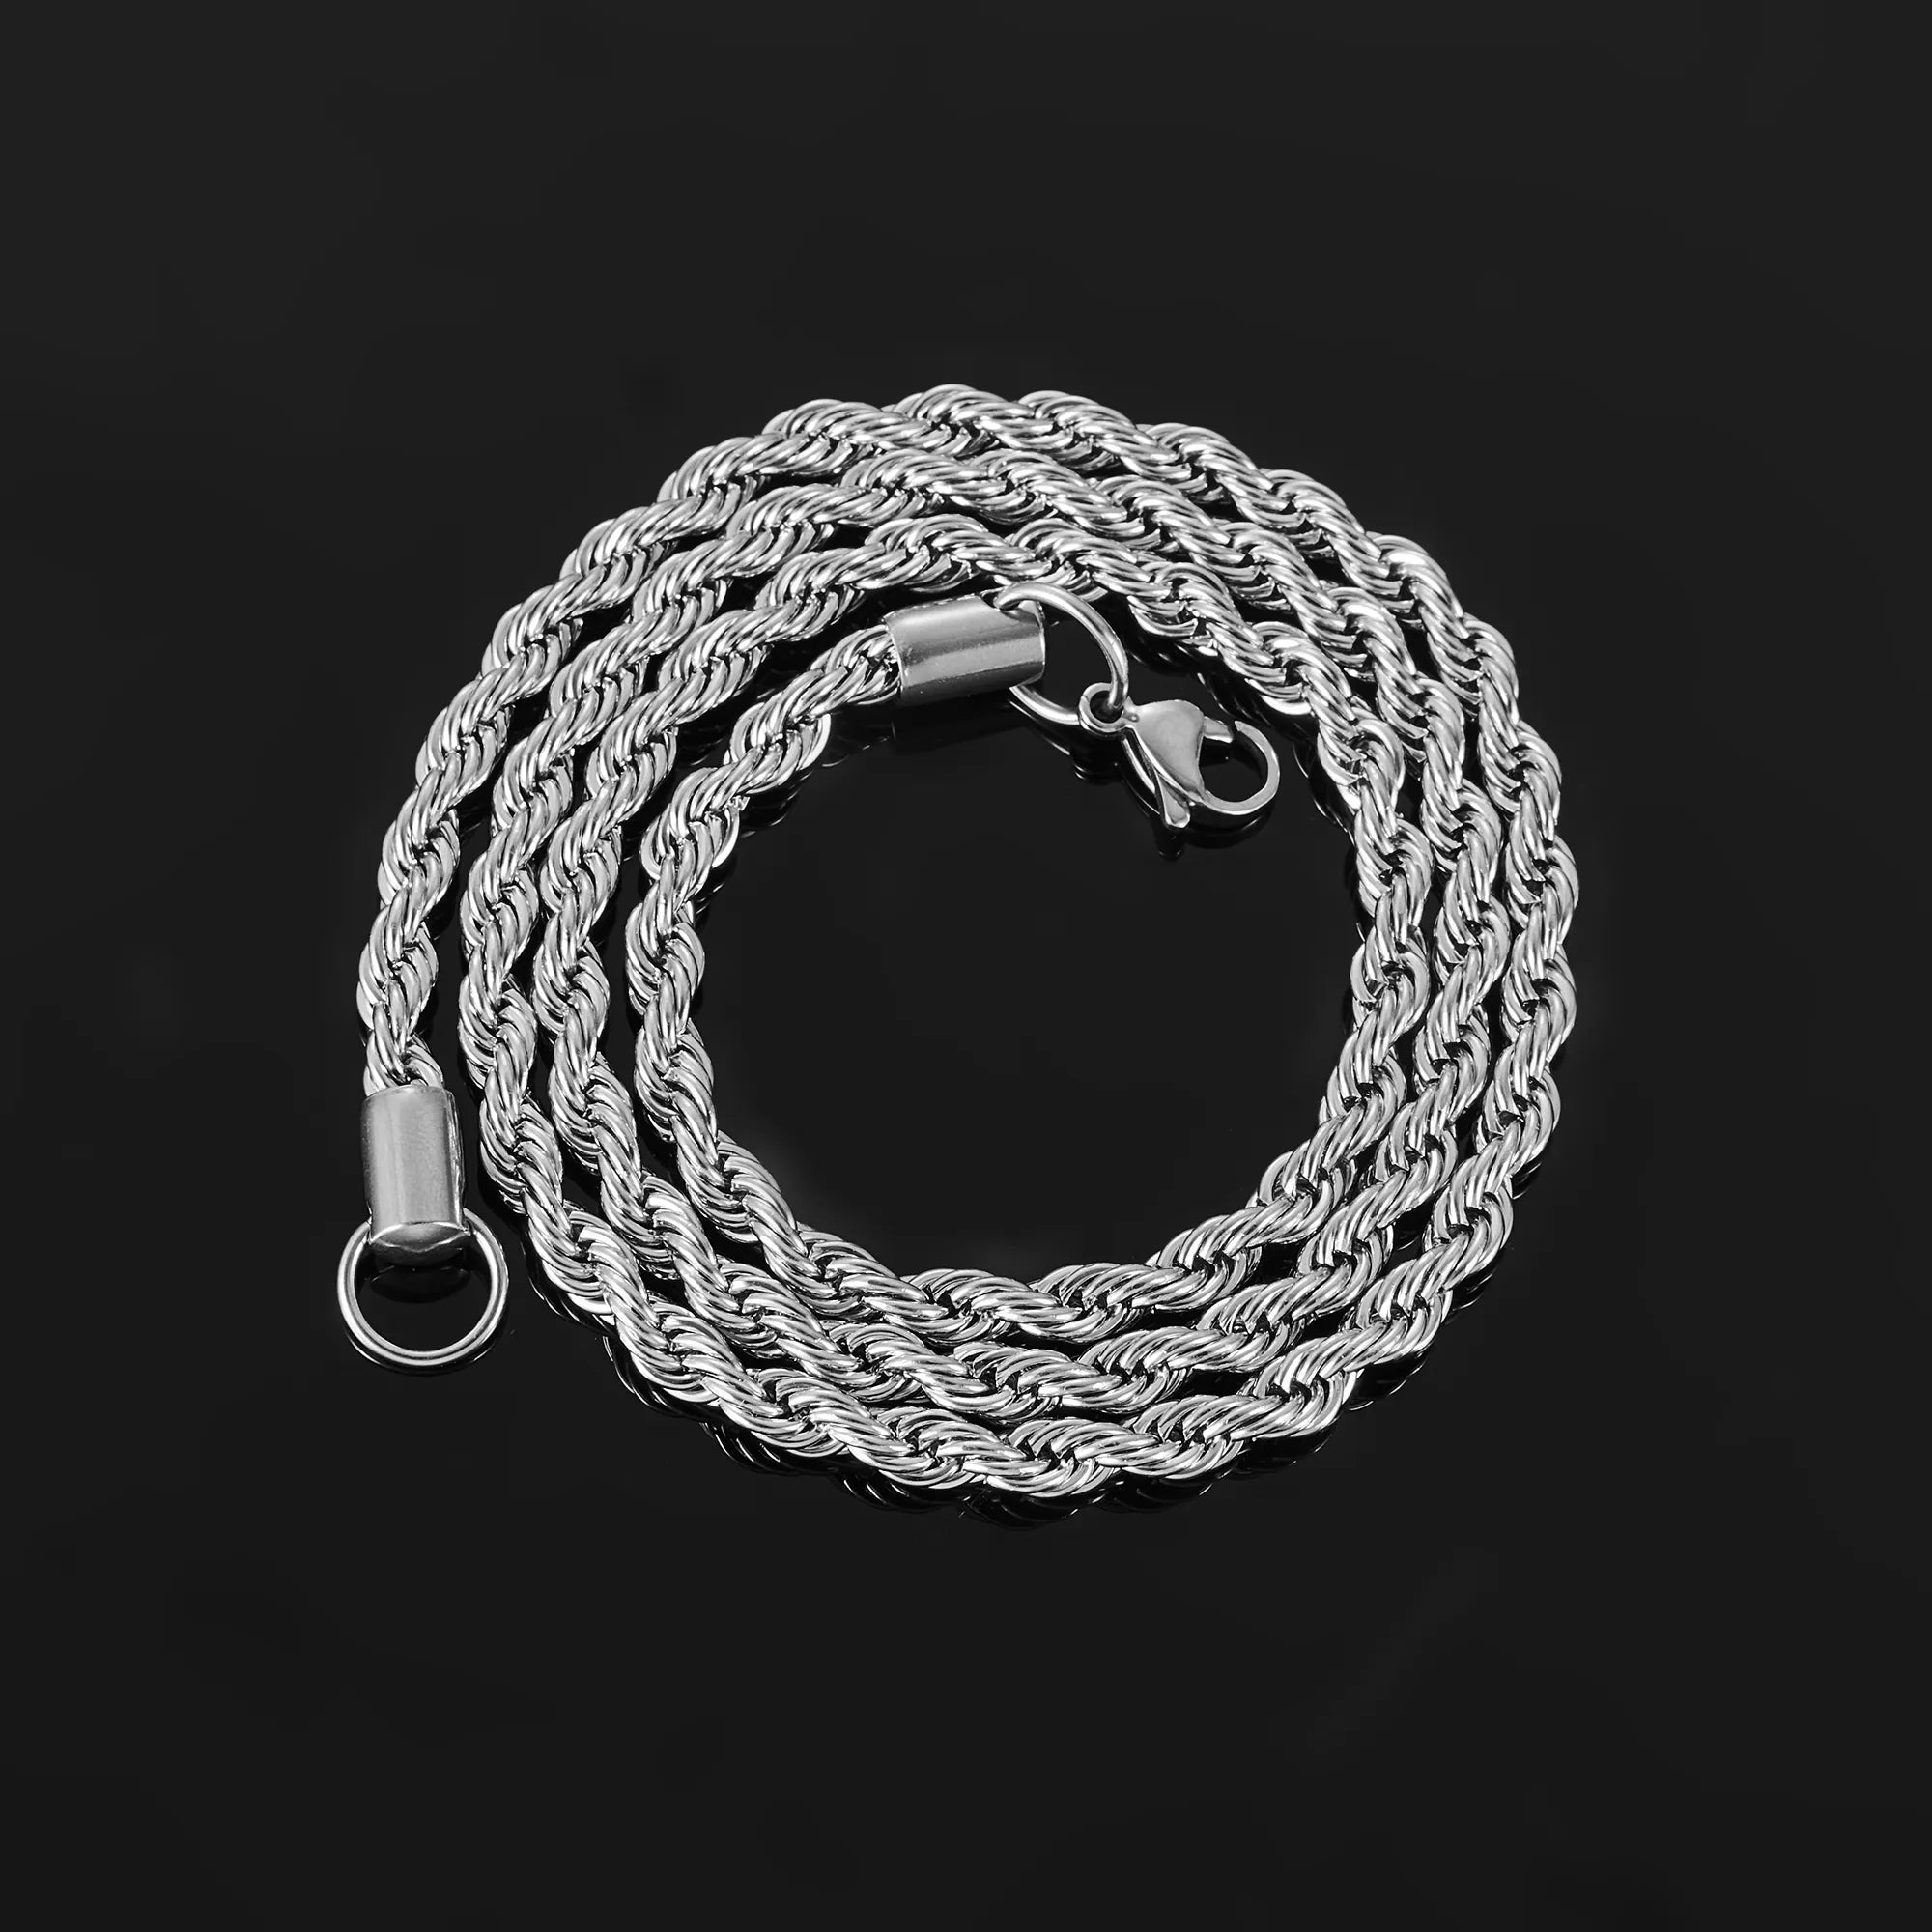 70 cm Stainless Steel Jewelry Silver Chain For Men Manntara